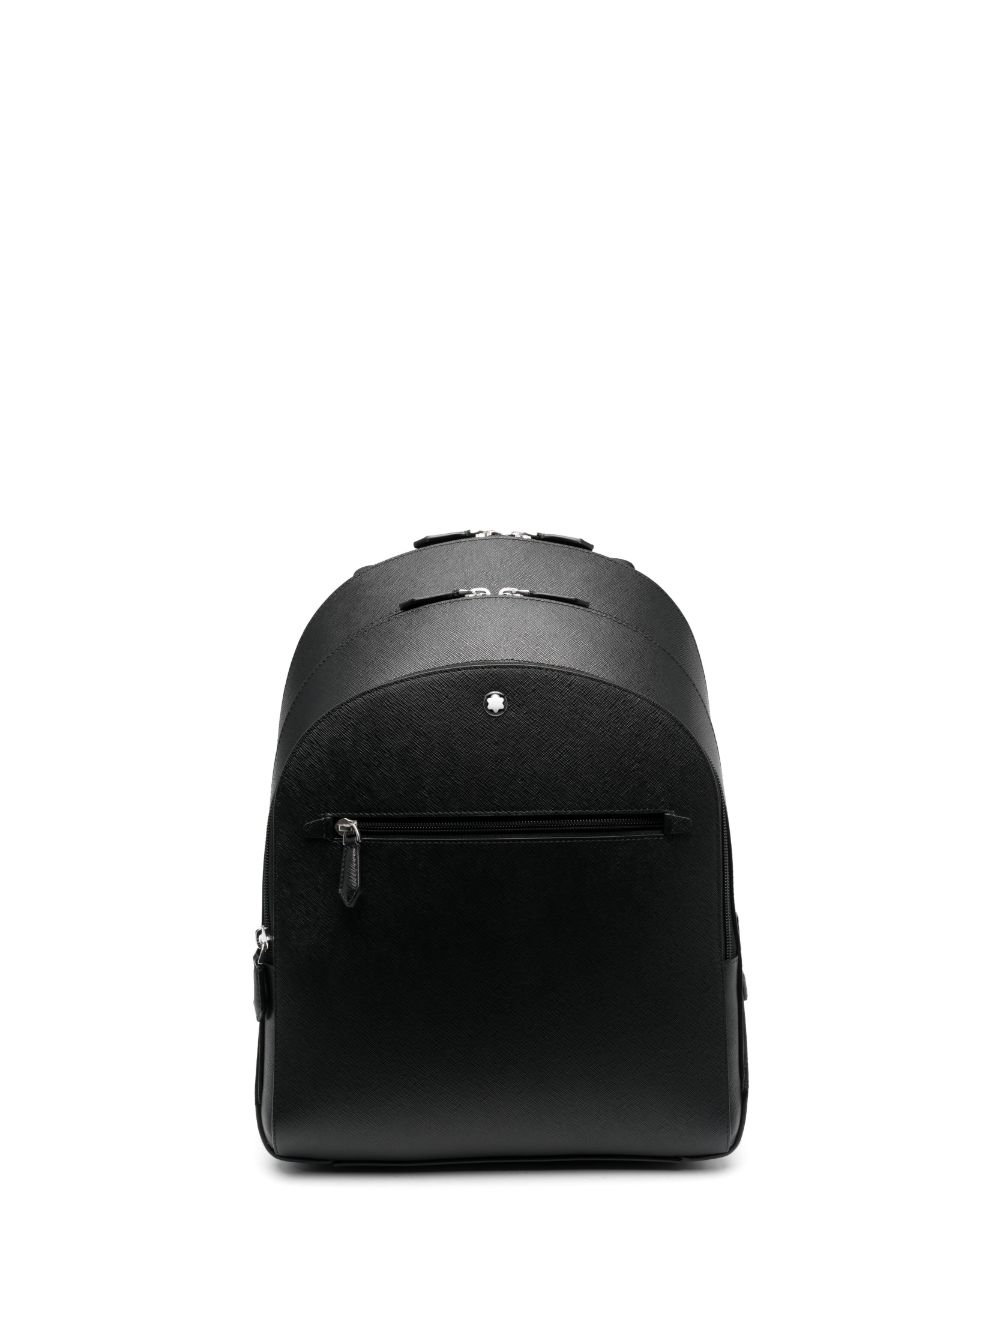 Montblanc Sartorial Leather Backpack - Farfetch